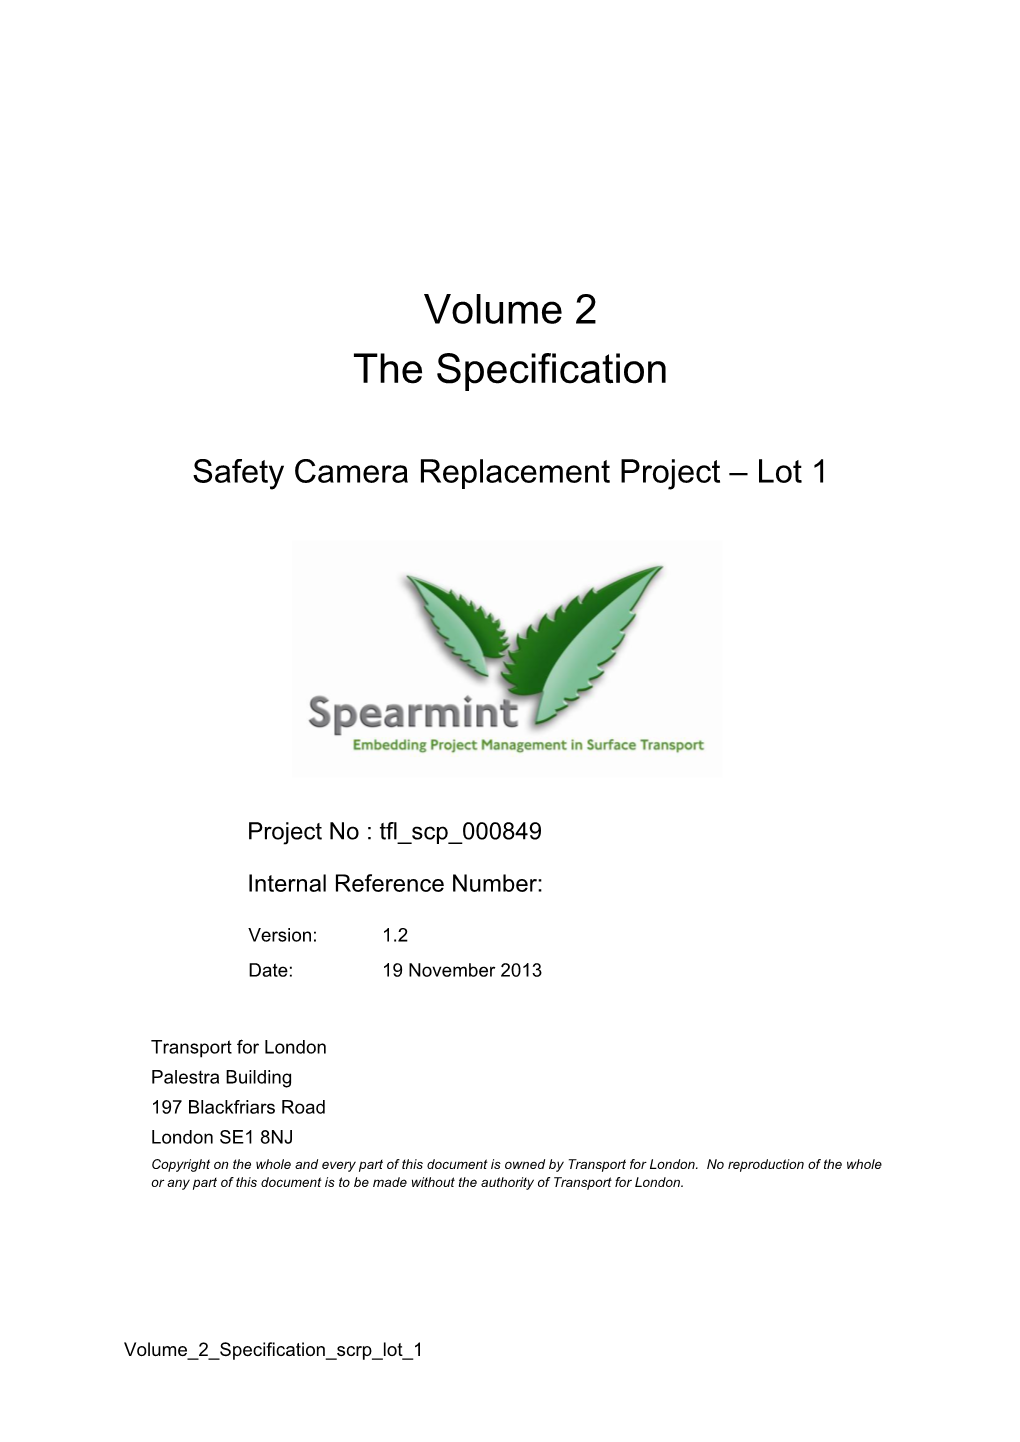 Volume 2 the Specification